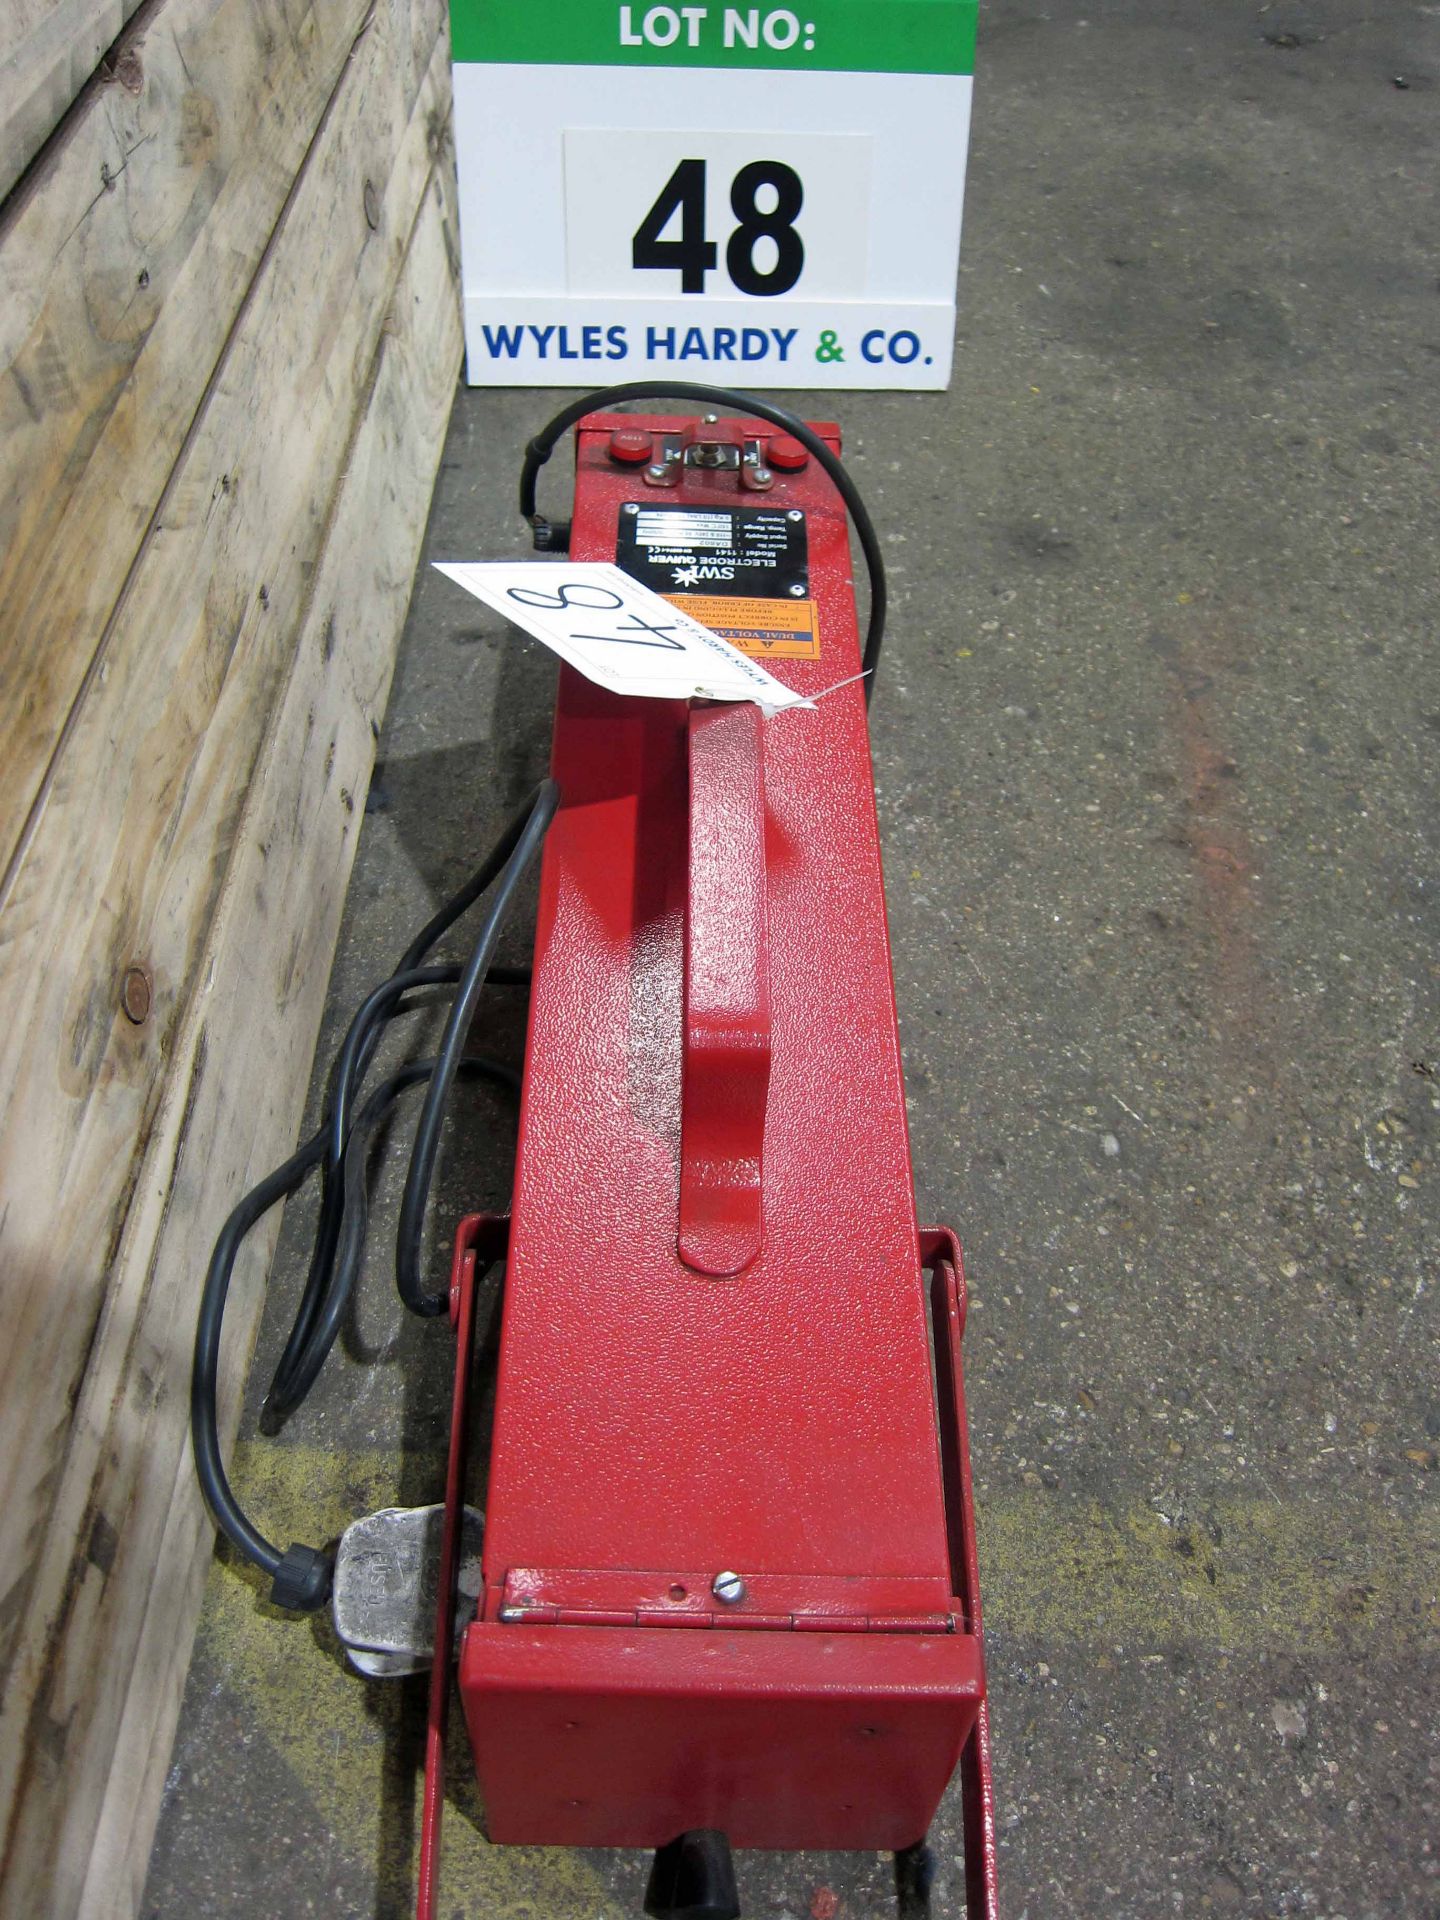 An SWP Model DA602 Welding Rod Heated Quiver, Dual Voltage (110V and 240V) - Image 2 of 2